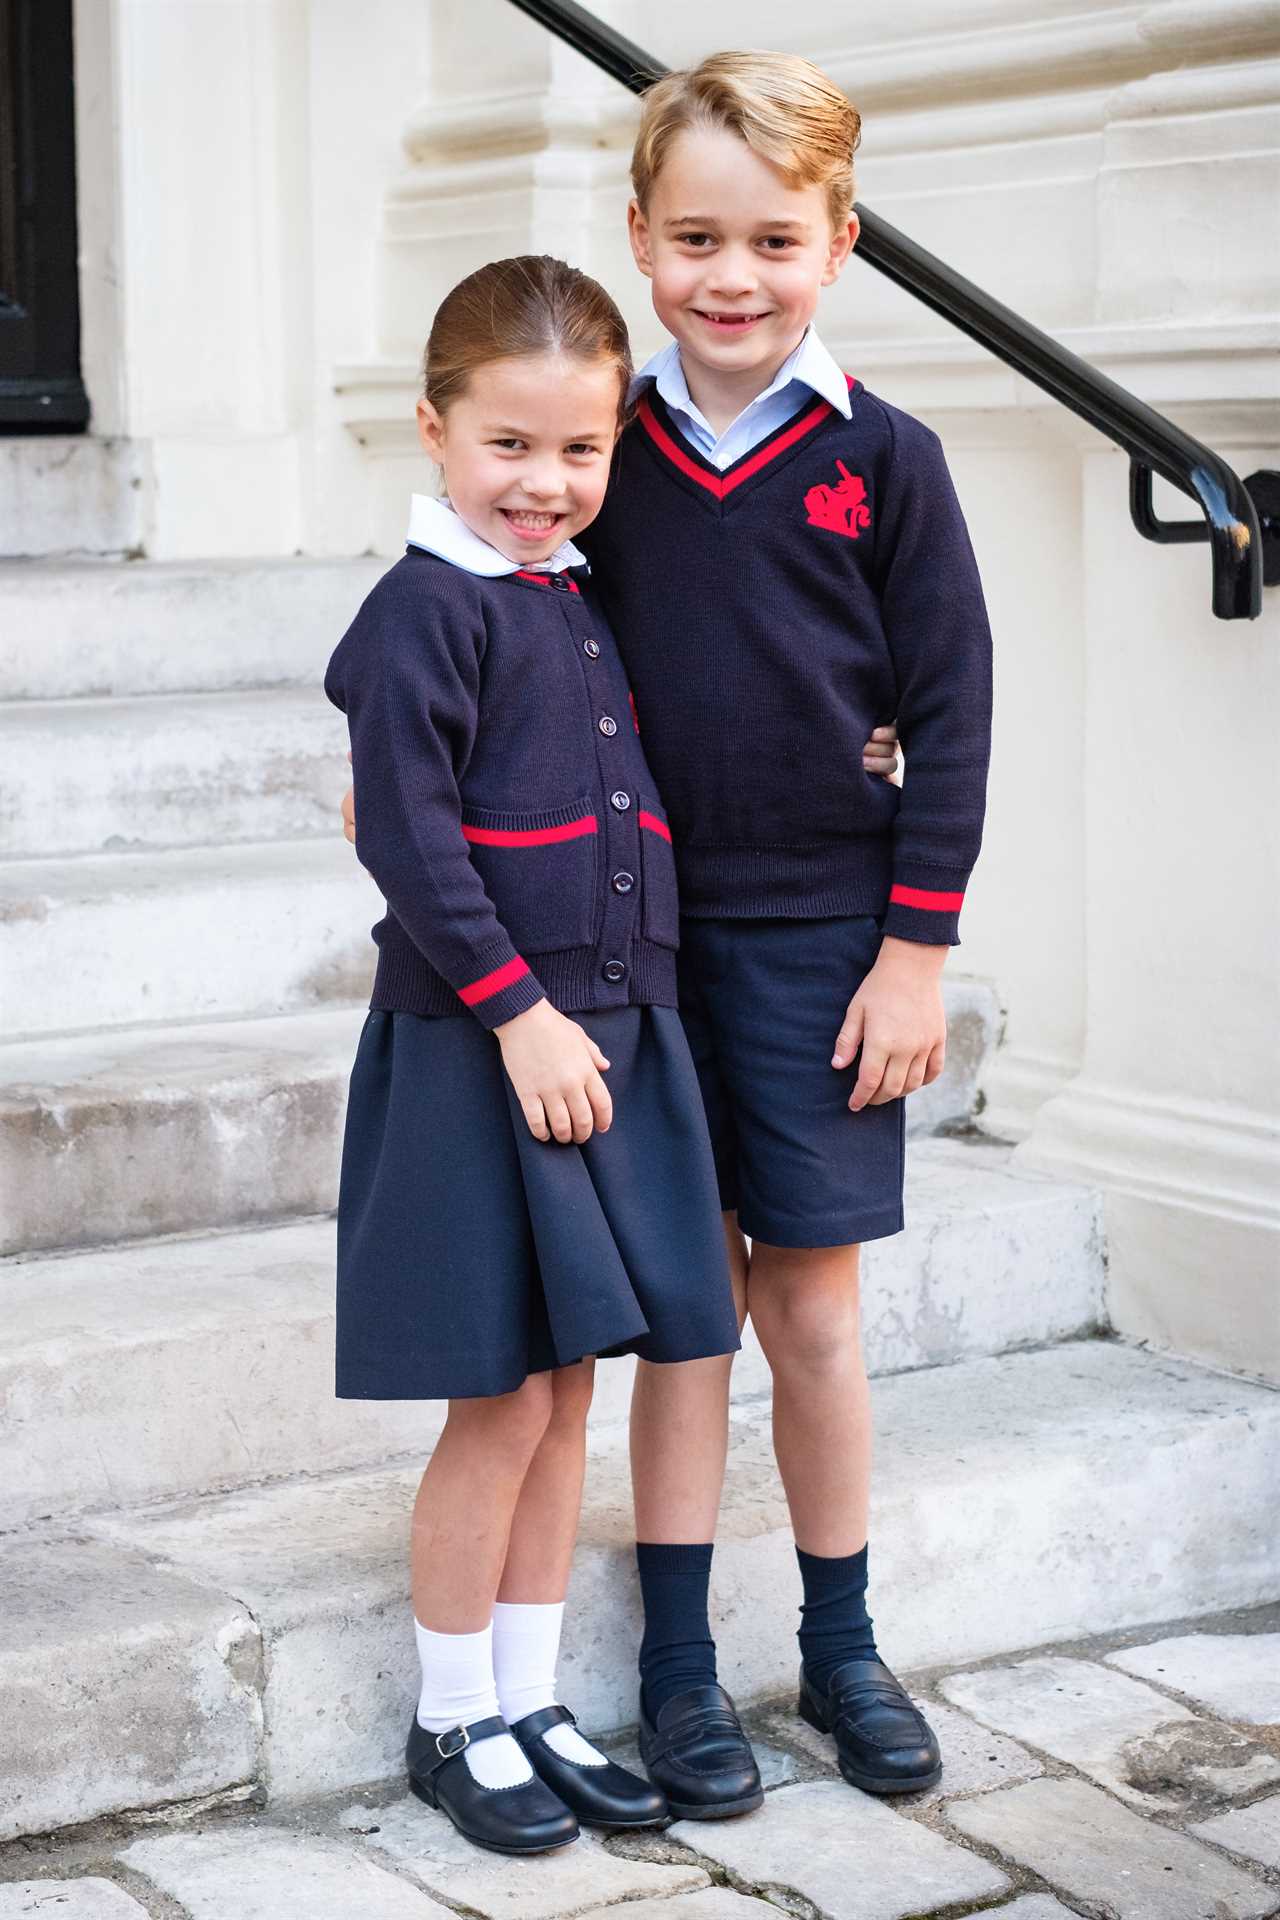 Princess Charlotte uses a different ‘normal’ name at school to help her blend in